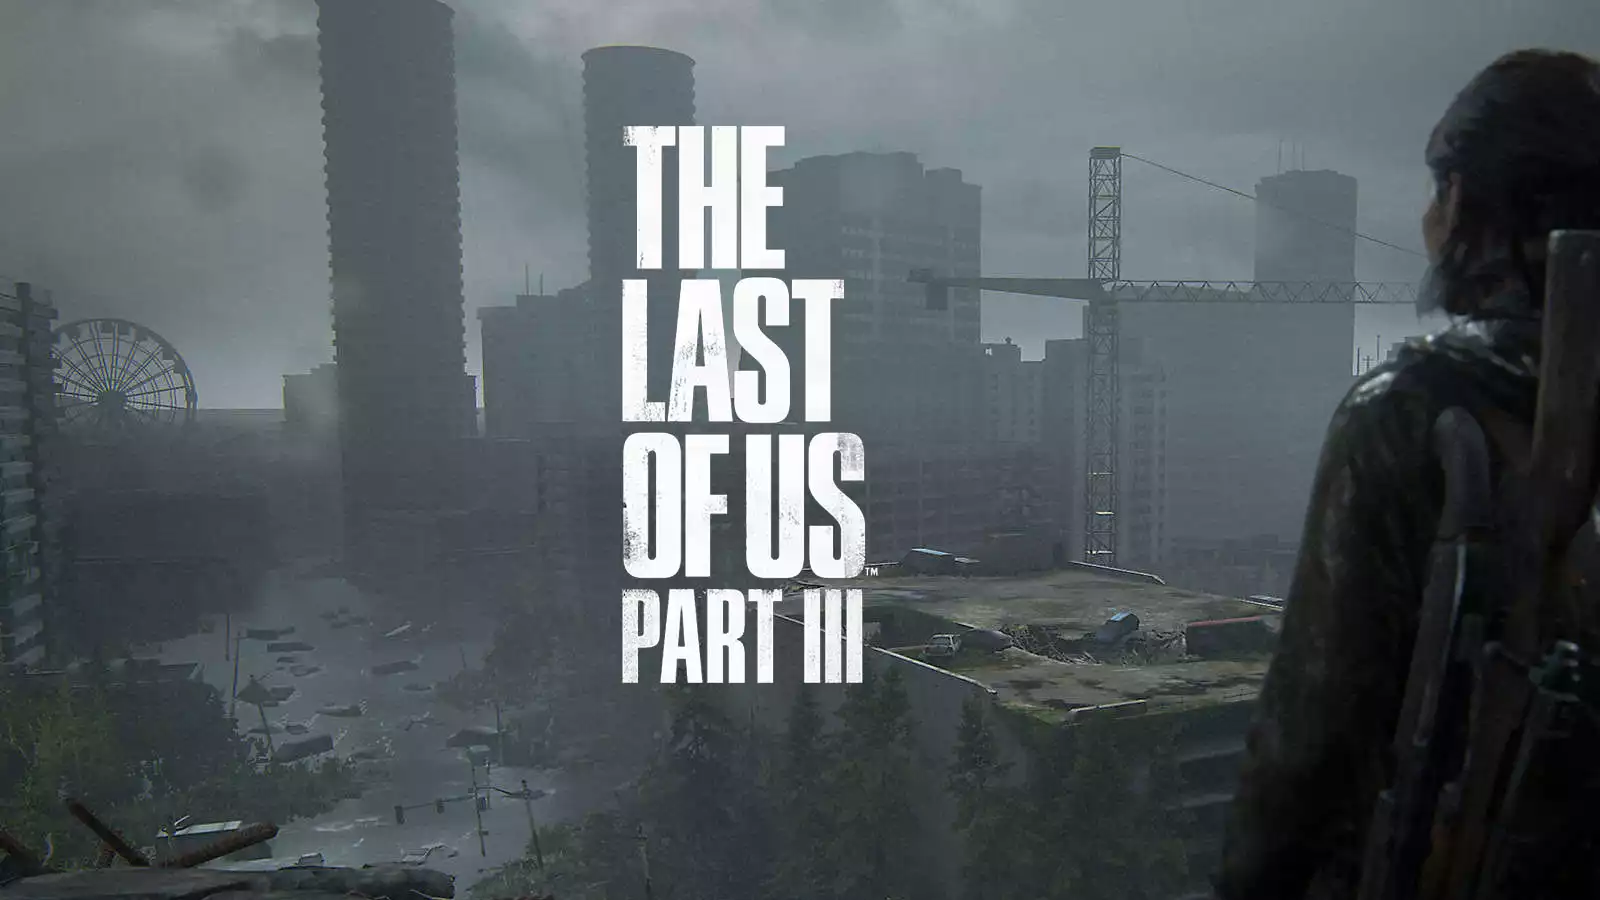 The Last Of Us Part 3 accidentally confirmed by Naughty Dog boss